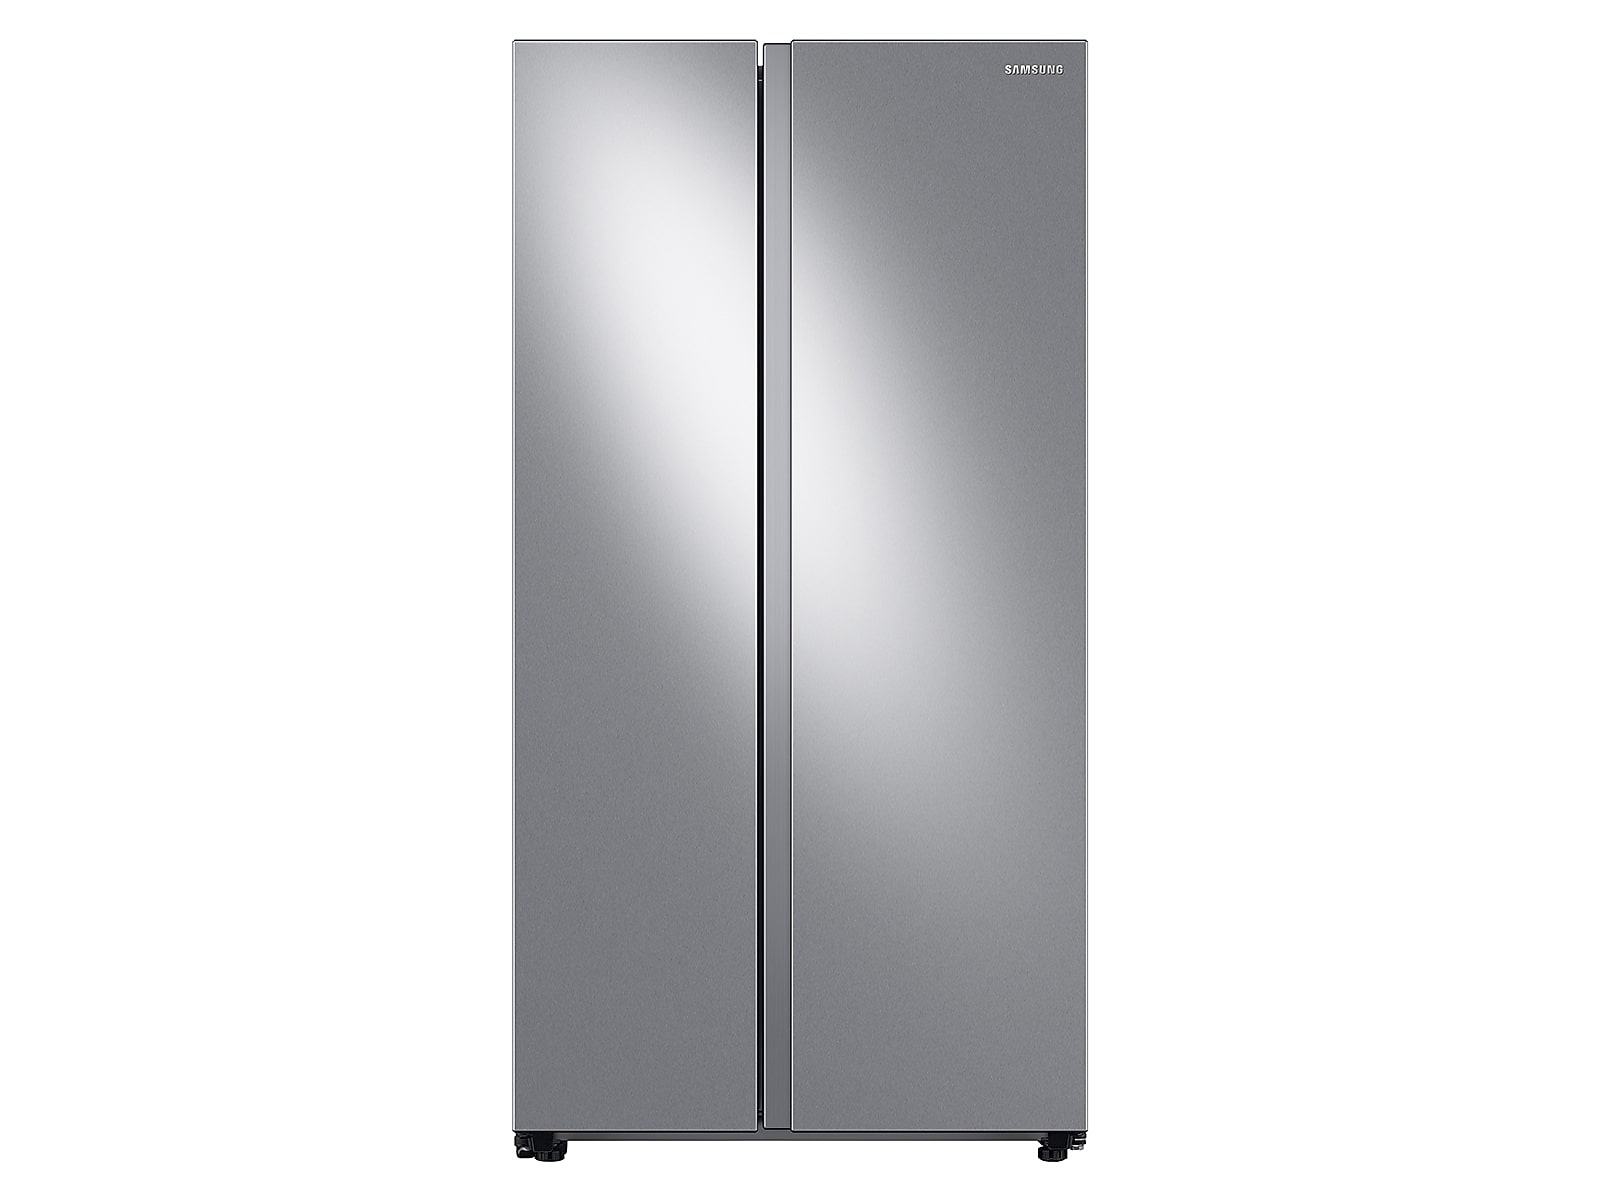 Samsung 23 cu. ft. Smart Counter Depth Side-by-Side Refrigerator in Silver(RS23A500ASR/AA)